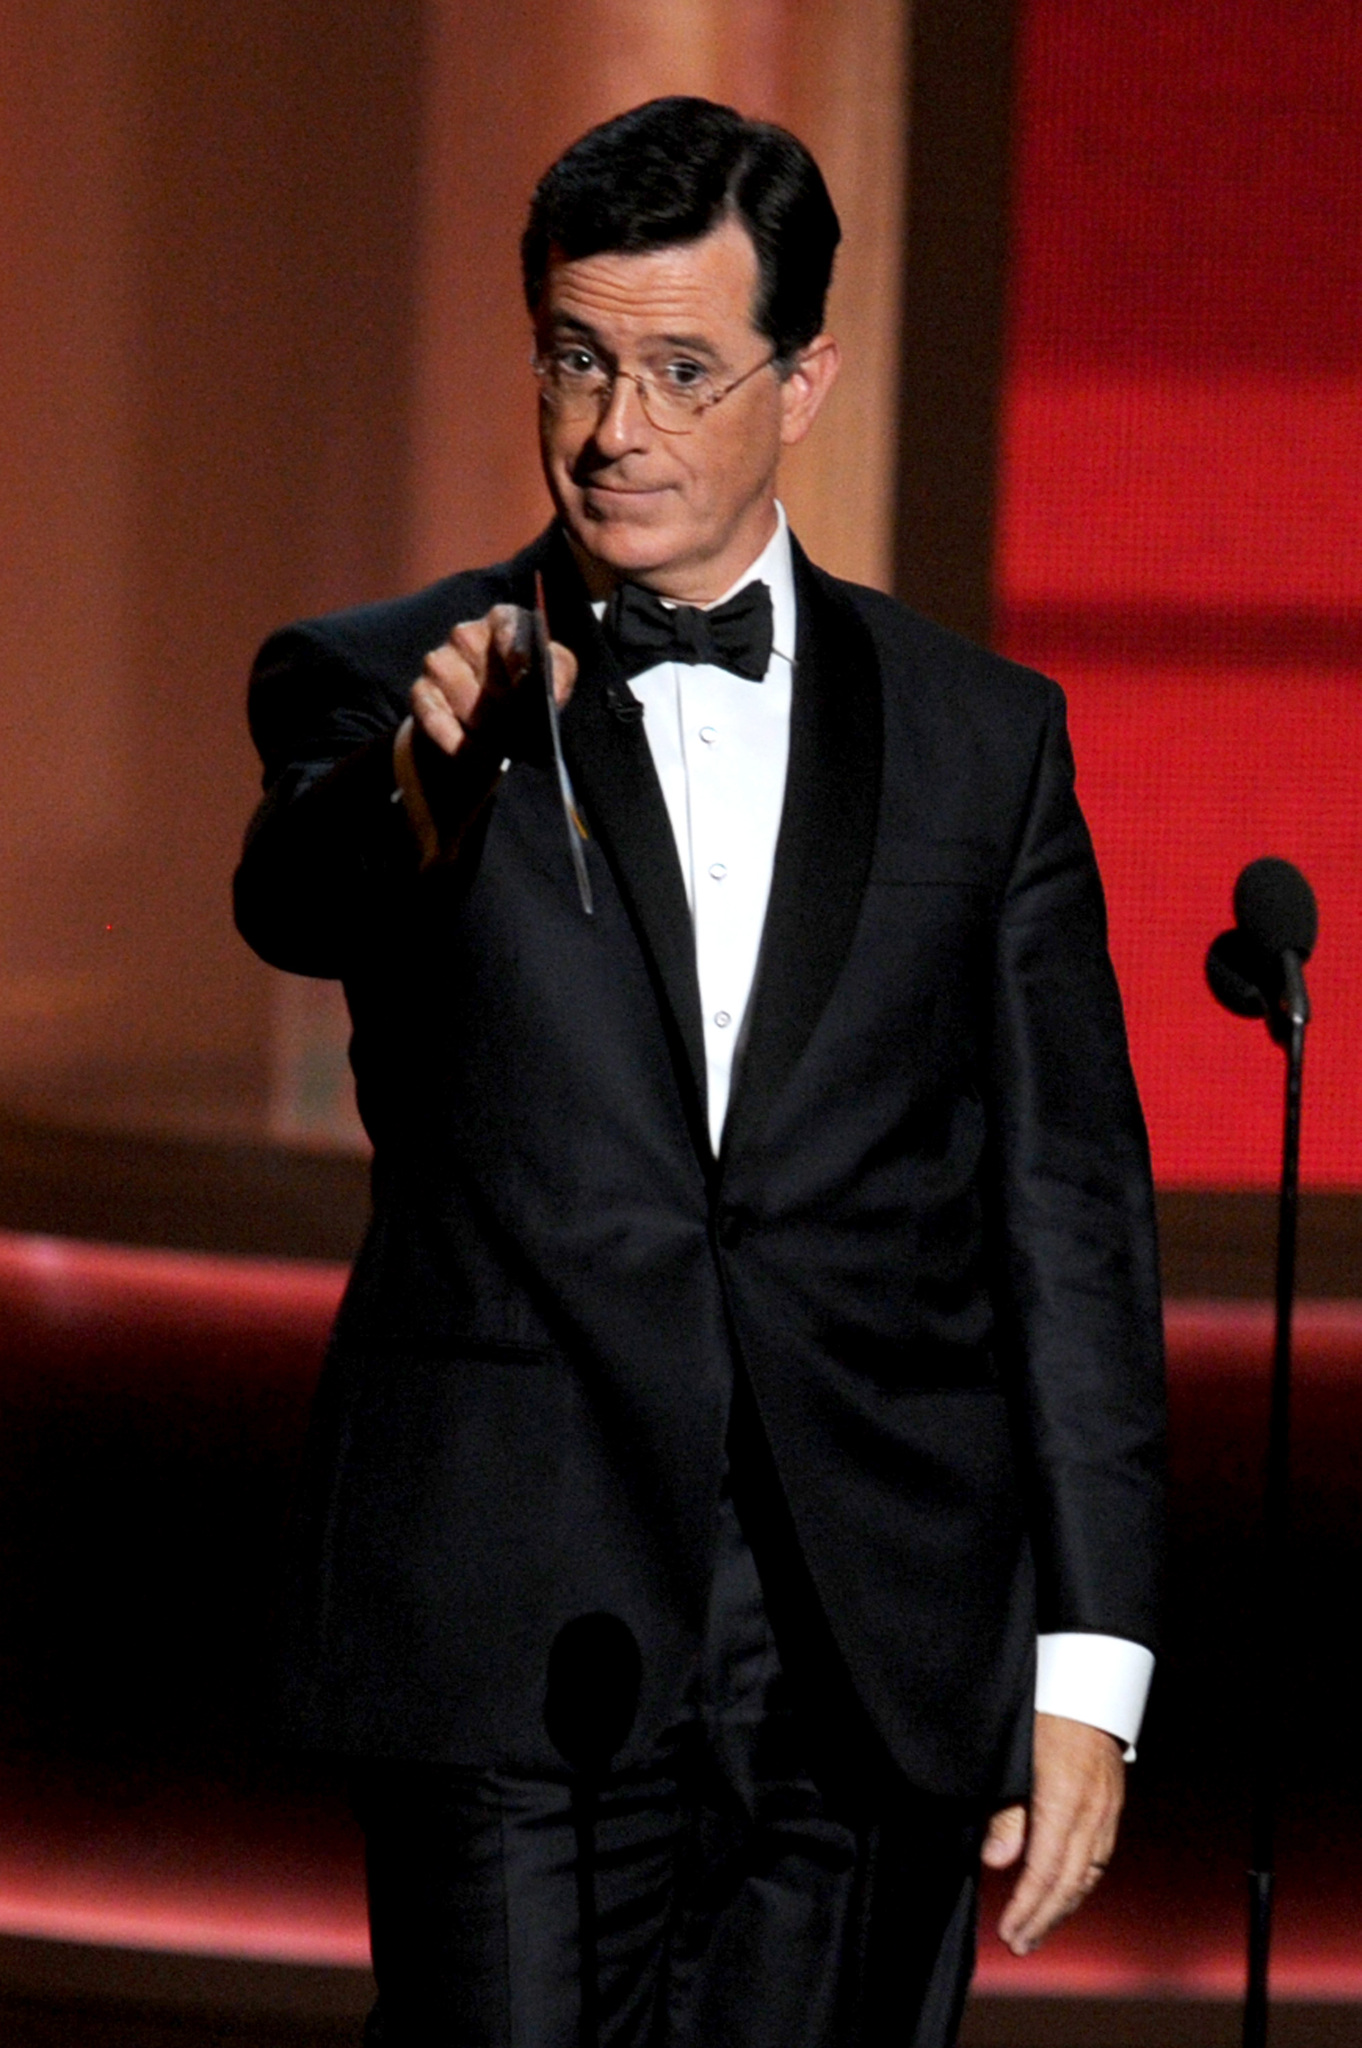 Stephen Colbert at event of The 64th Primetime Emmy Awards (2012)